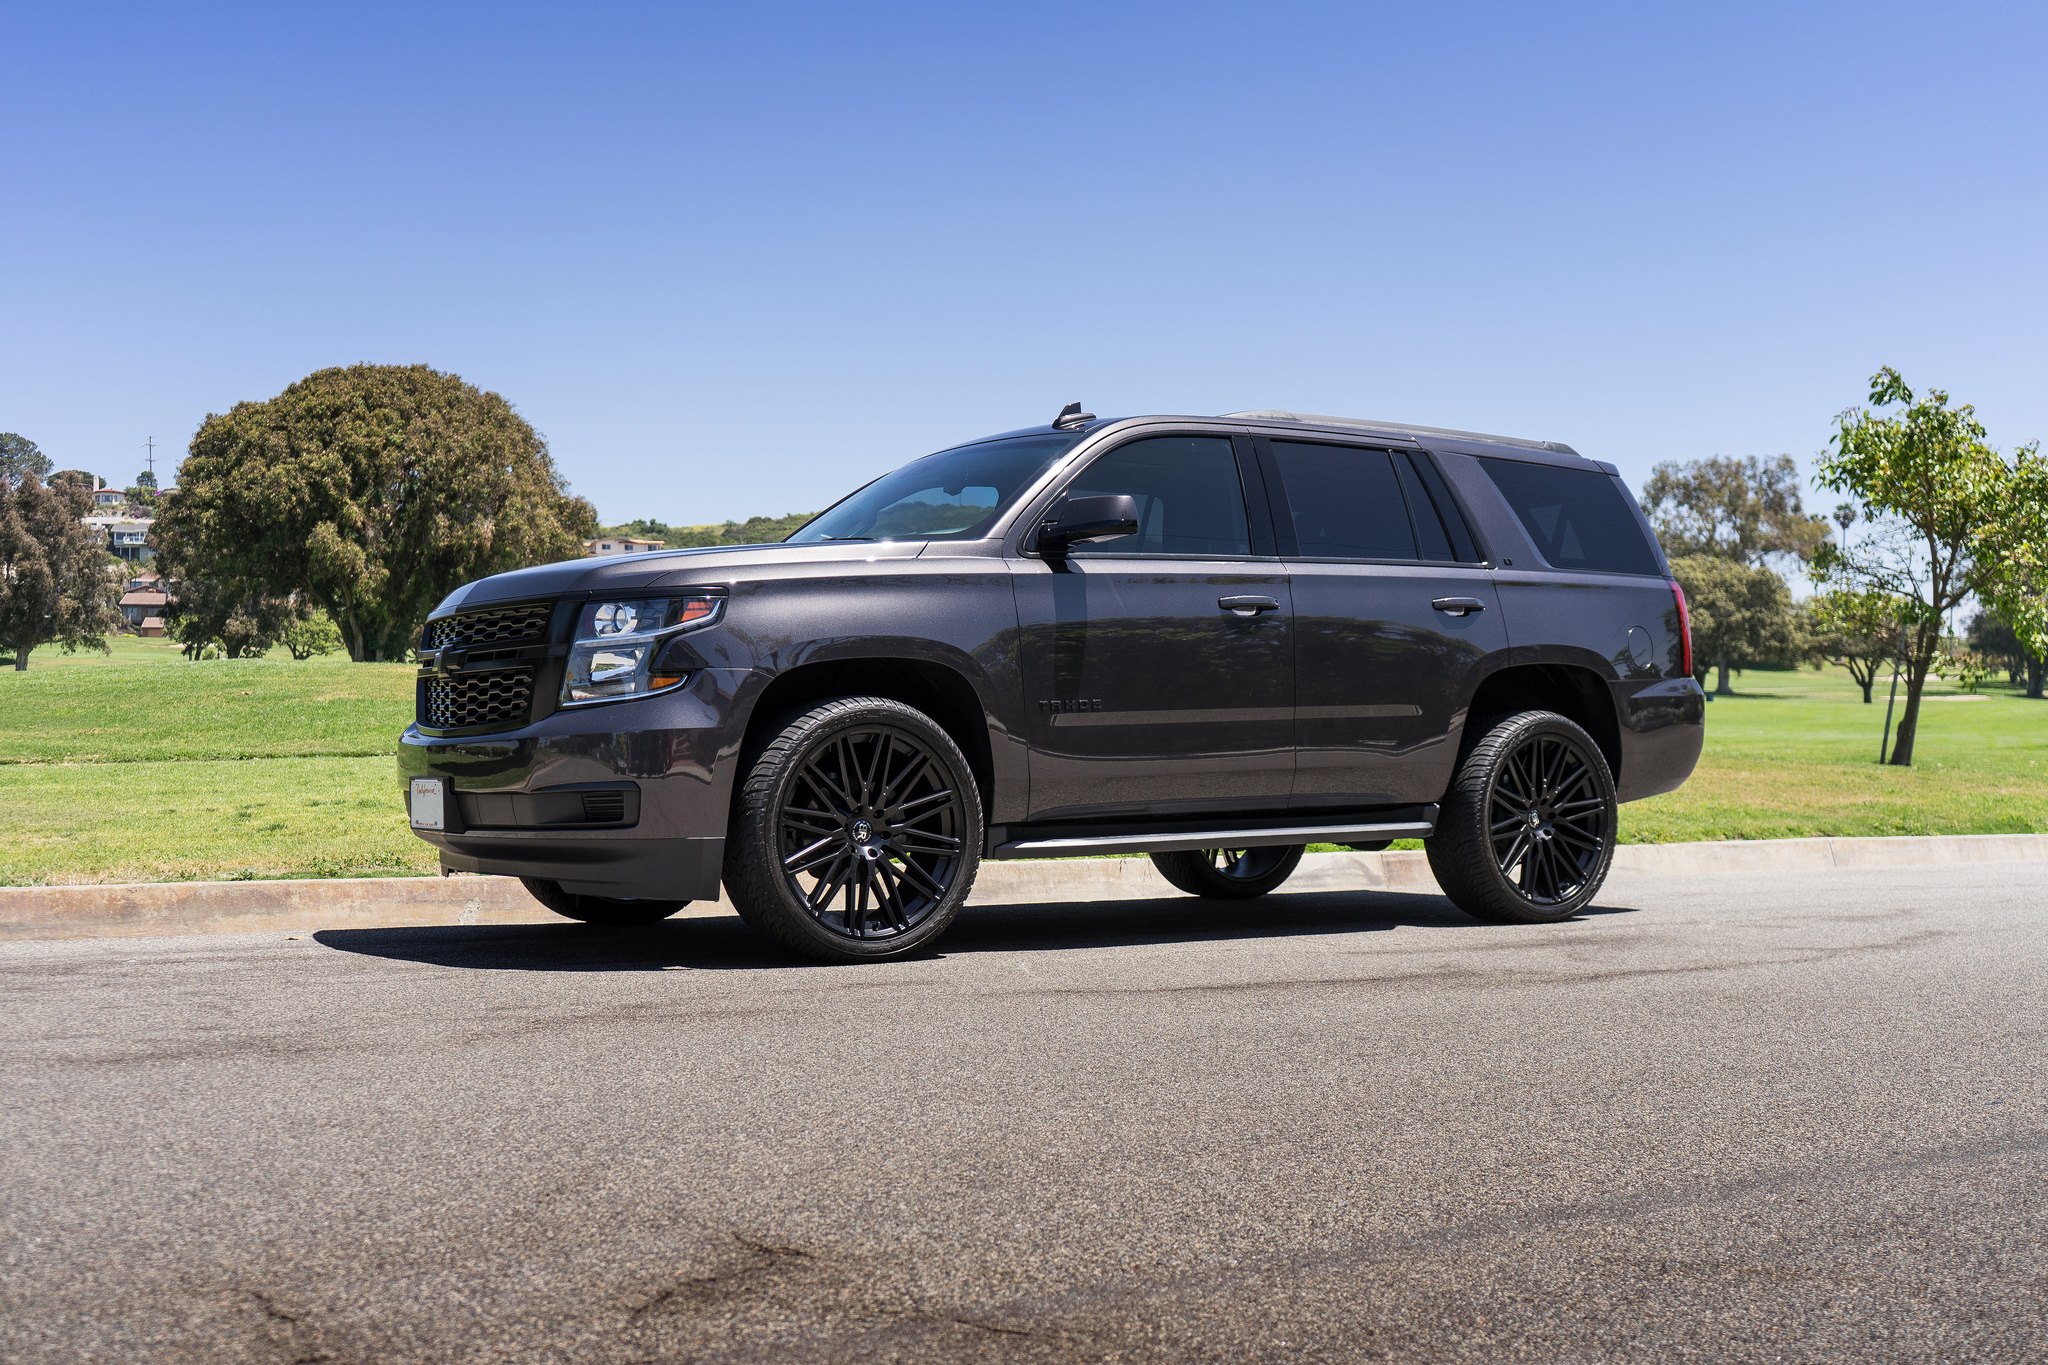 Aftermarket Running Boards on Black Chevy Tahoe - Photo by Black Rhino